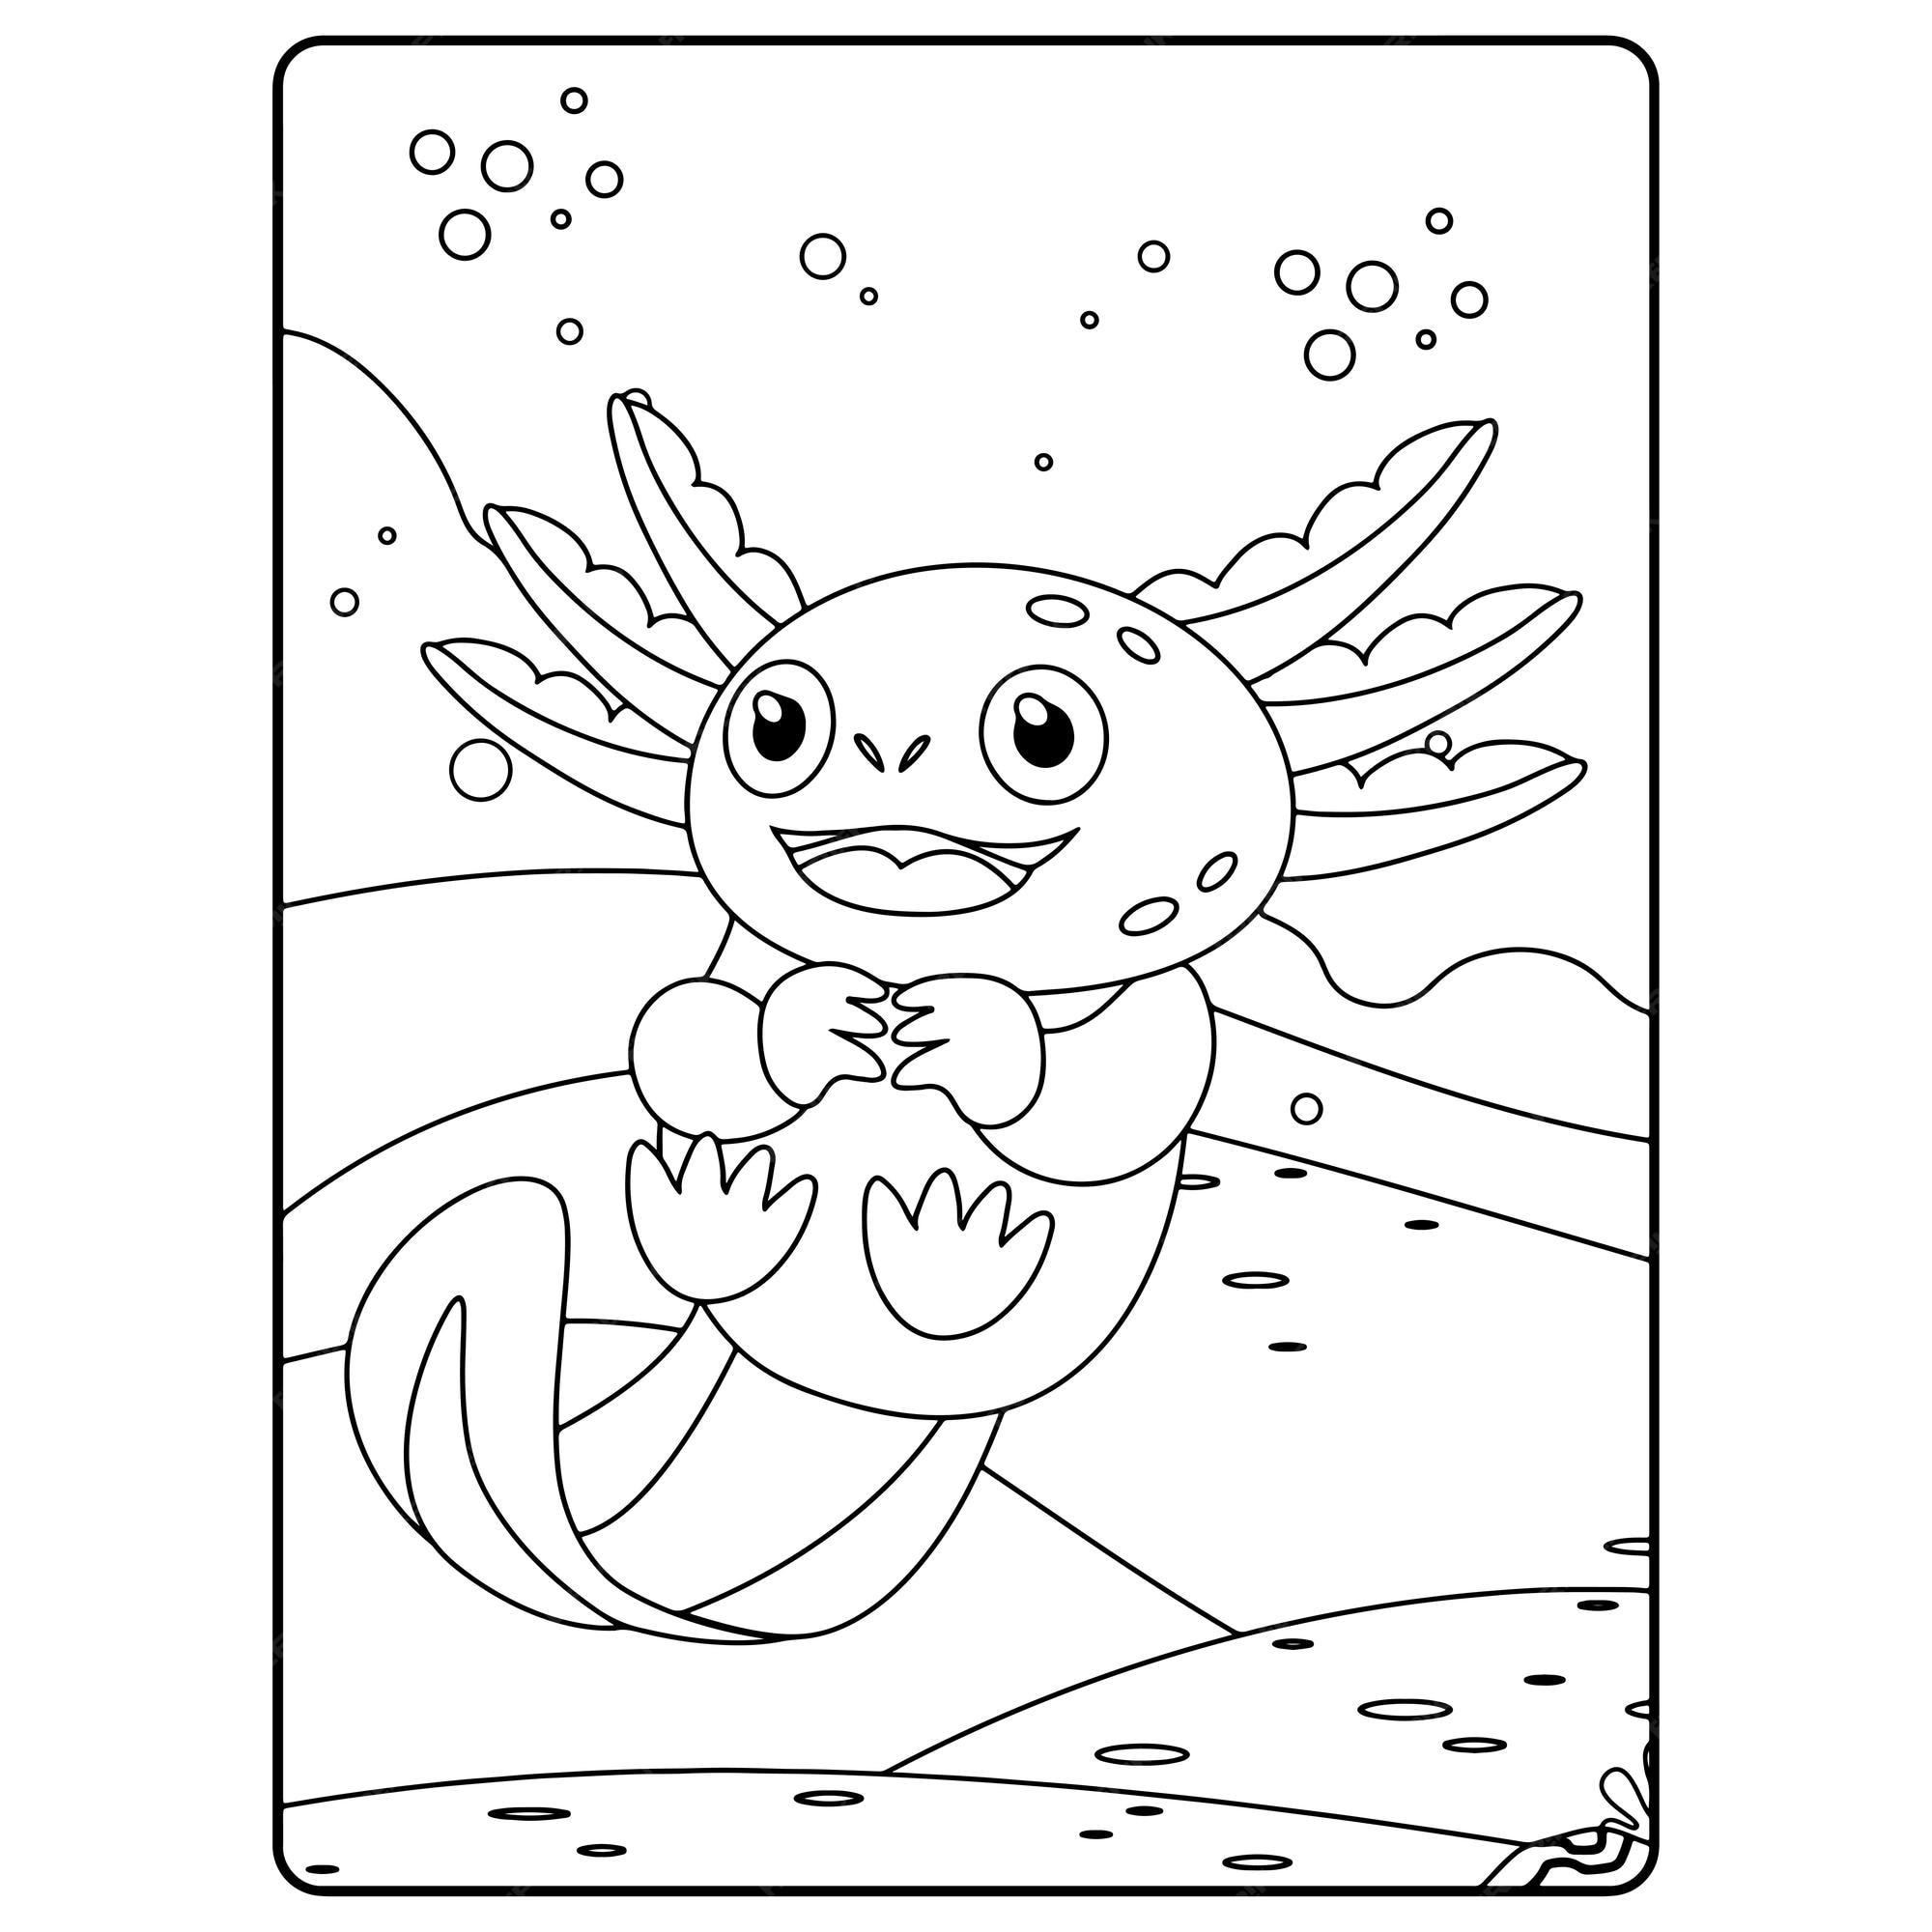 Premium vector axolotl coloring pages for kids